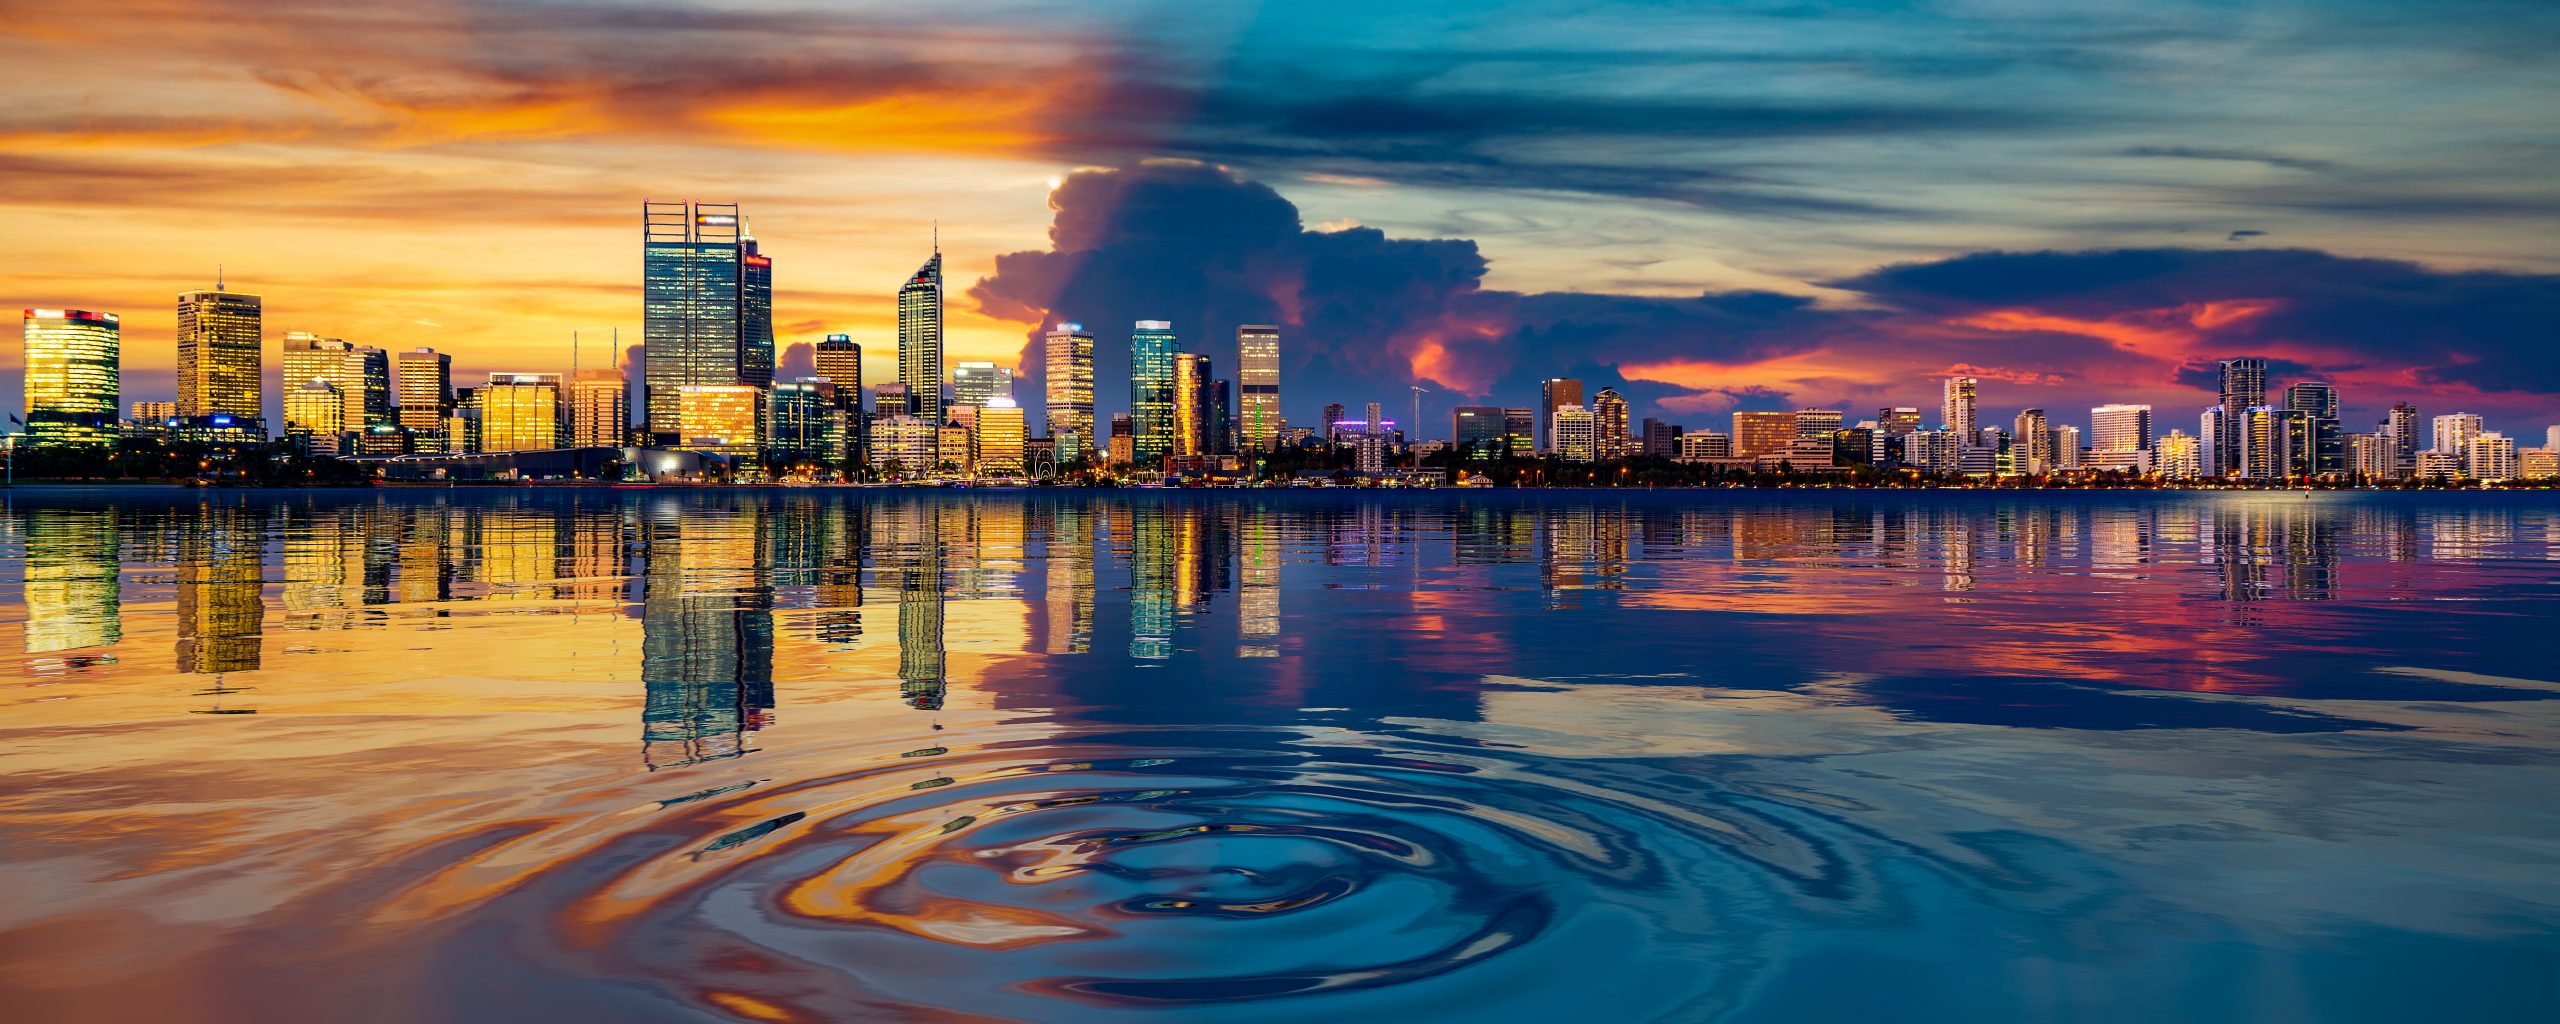 Perth cityscape and reflection in the river